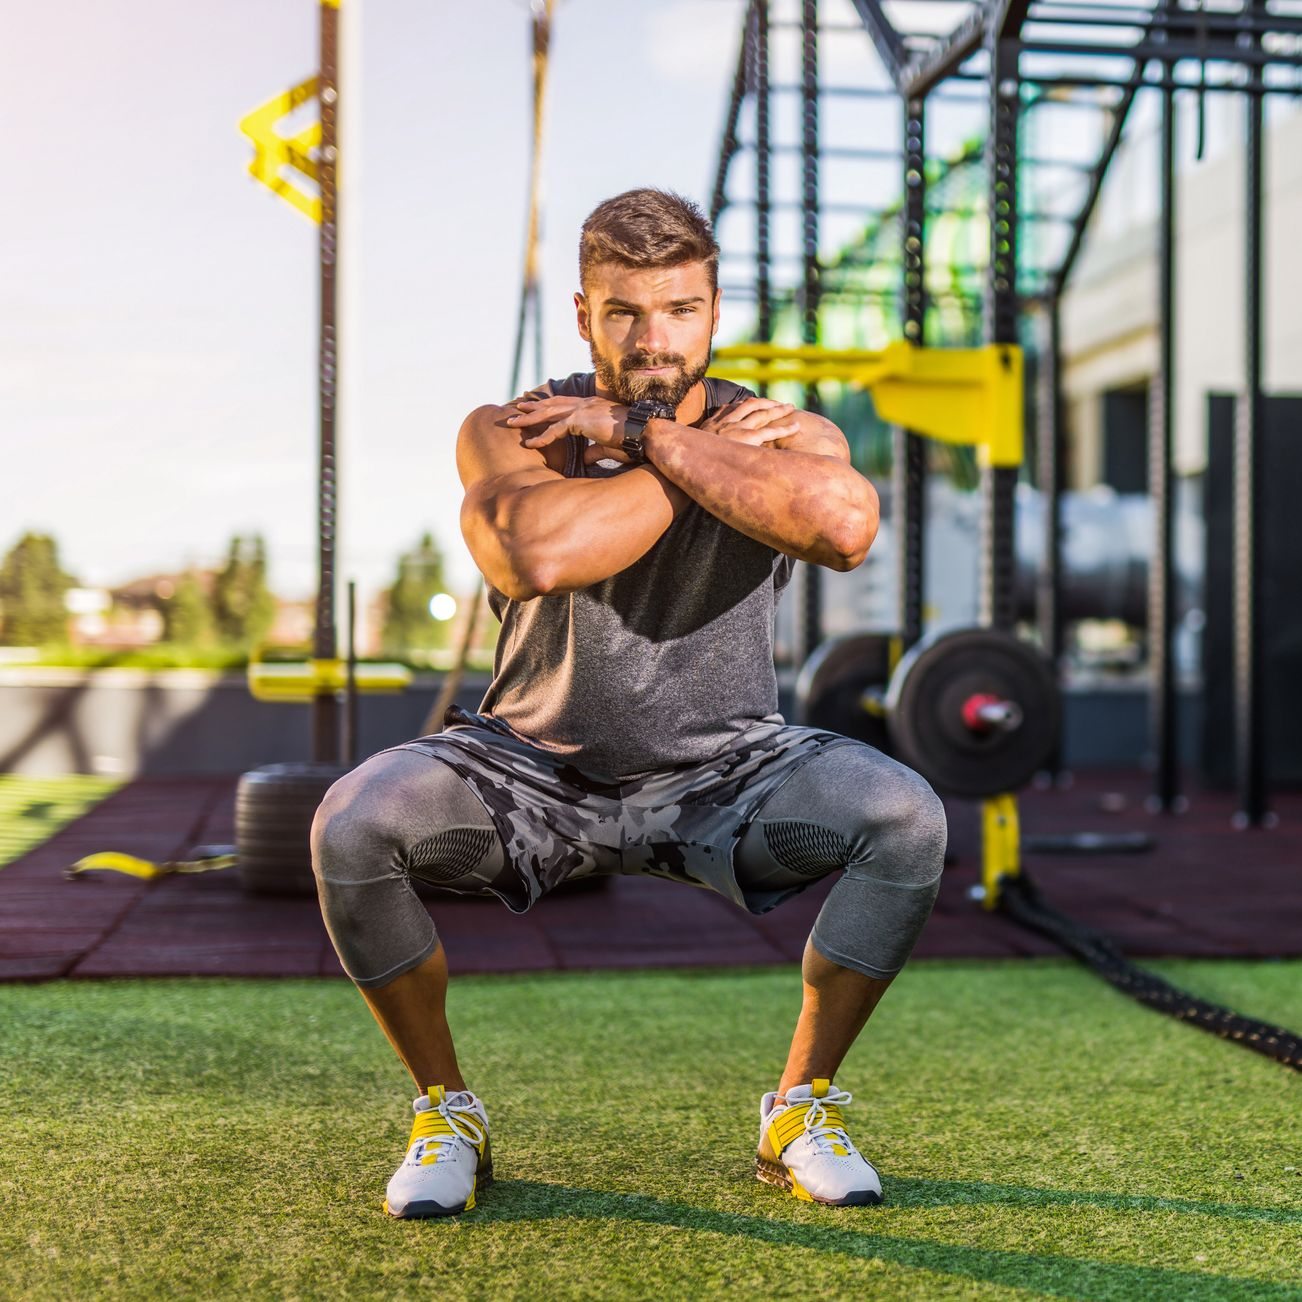 Burn Fat and Get Shredded With This 200-Rep Bodyweight Workout Plan